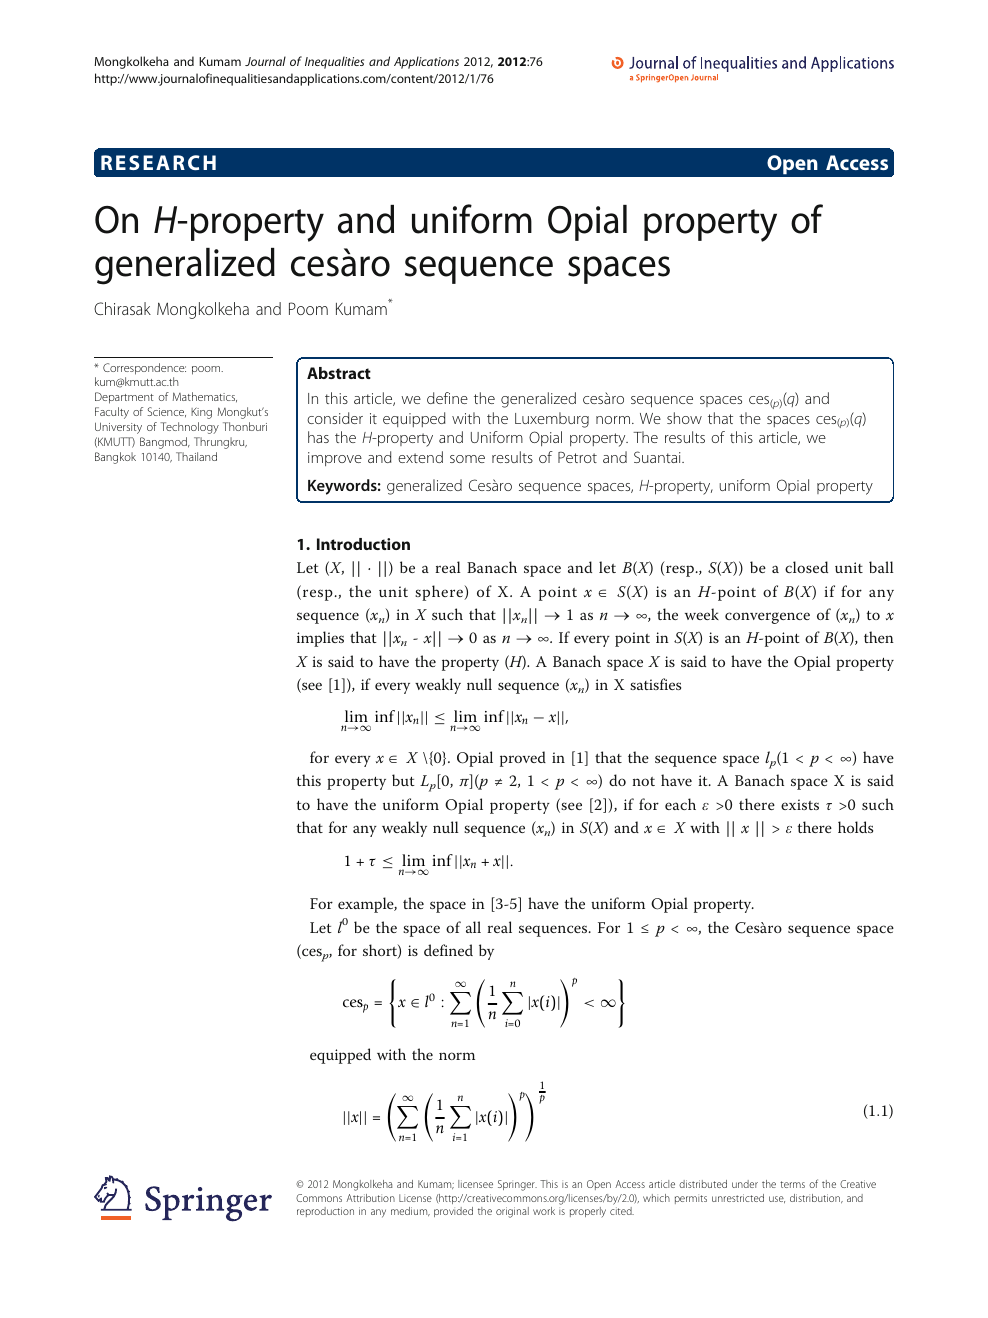 On H Property And Uniform Opial Property Of Generalized Cesaro Sequence Spaces Topic Of Research Paper In Mathematics Download Scholarly Article Pdf And Read For Free On Cyberleninka Open Science Hub